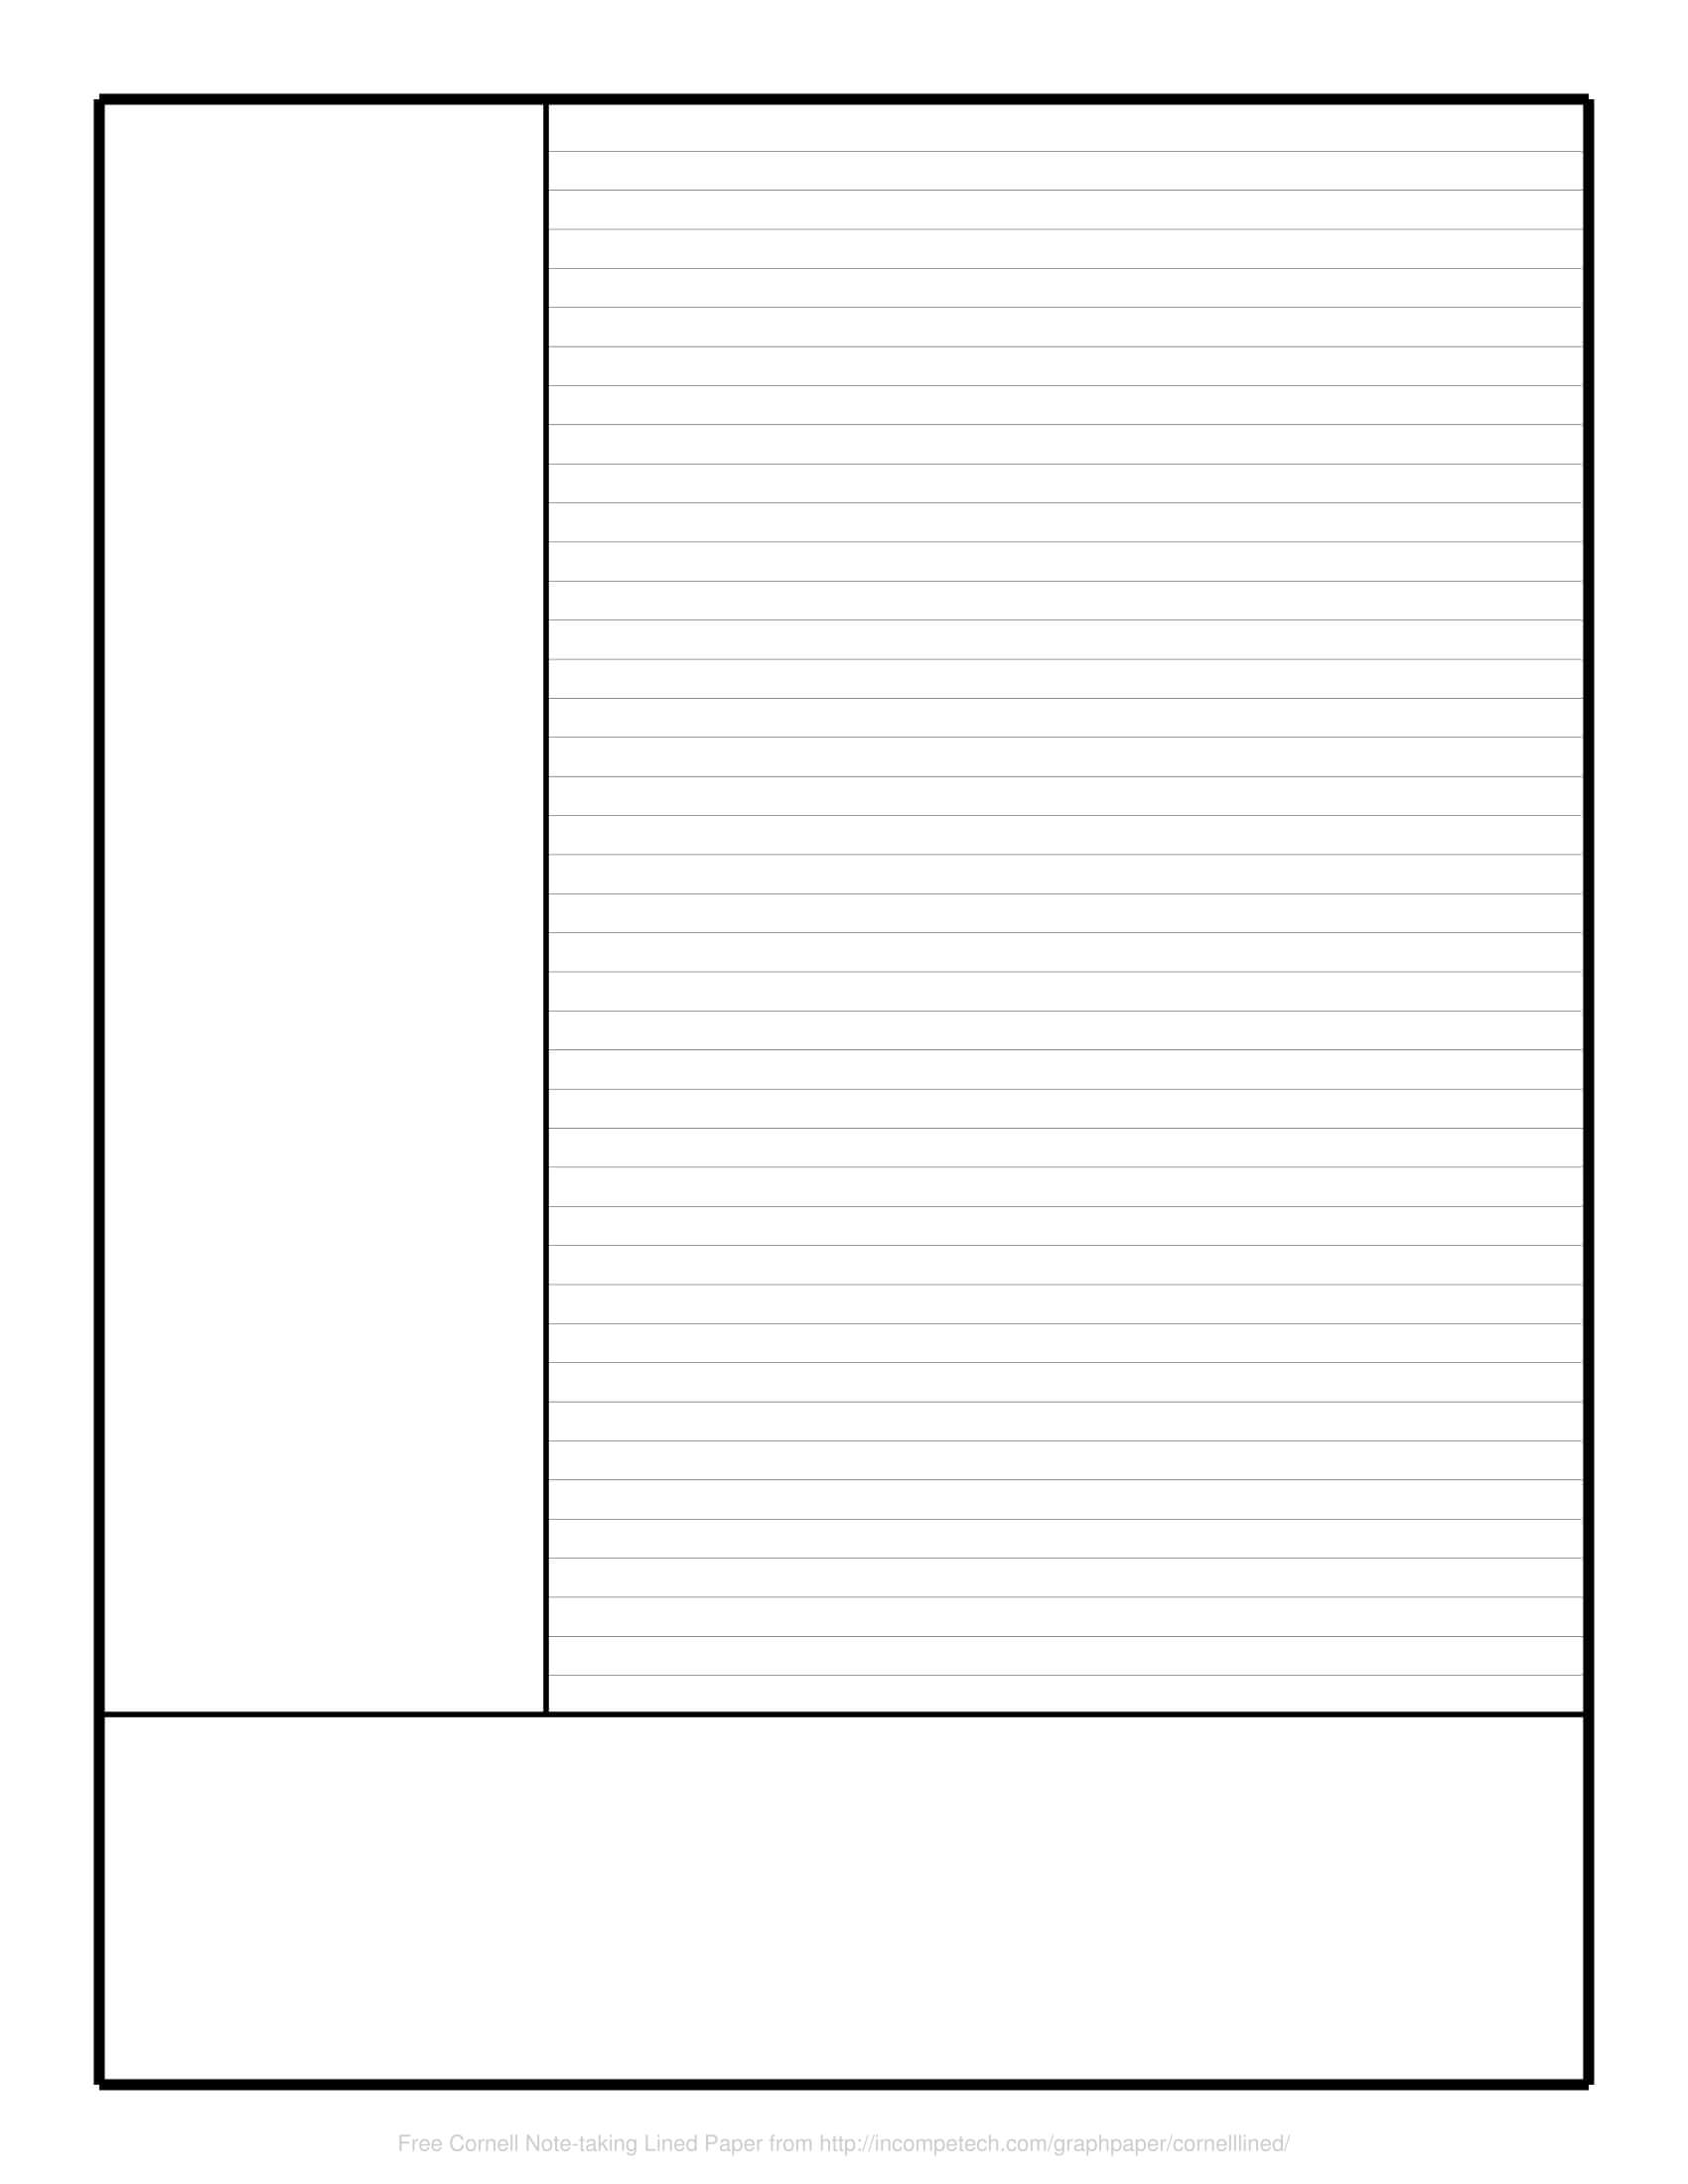 cornell-note-template-word